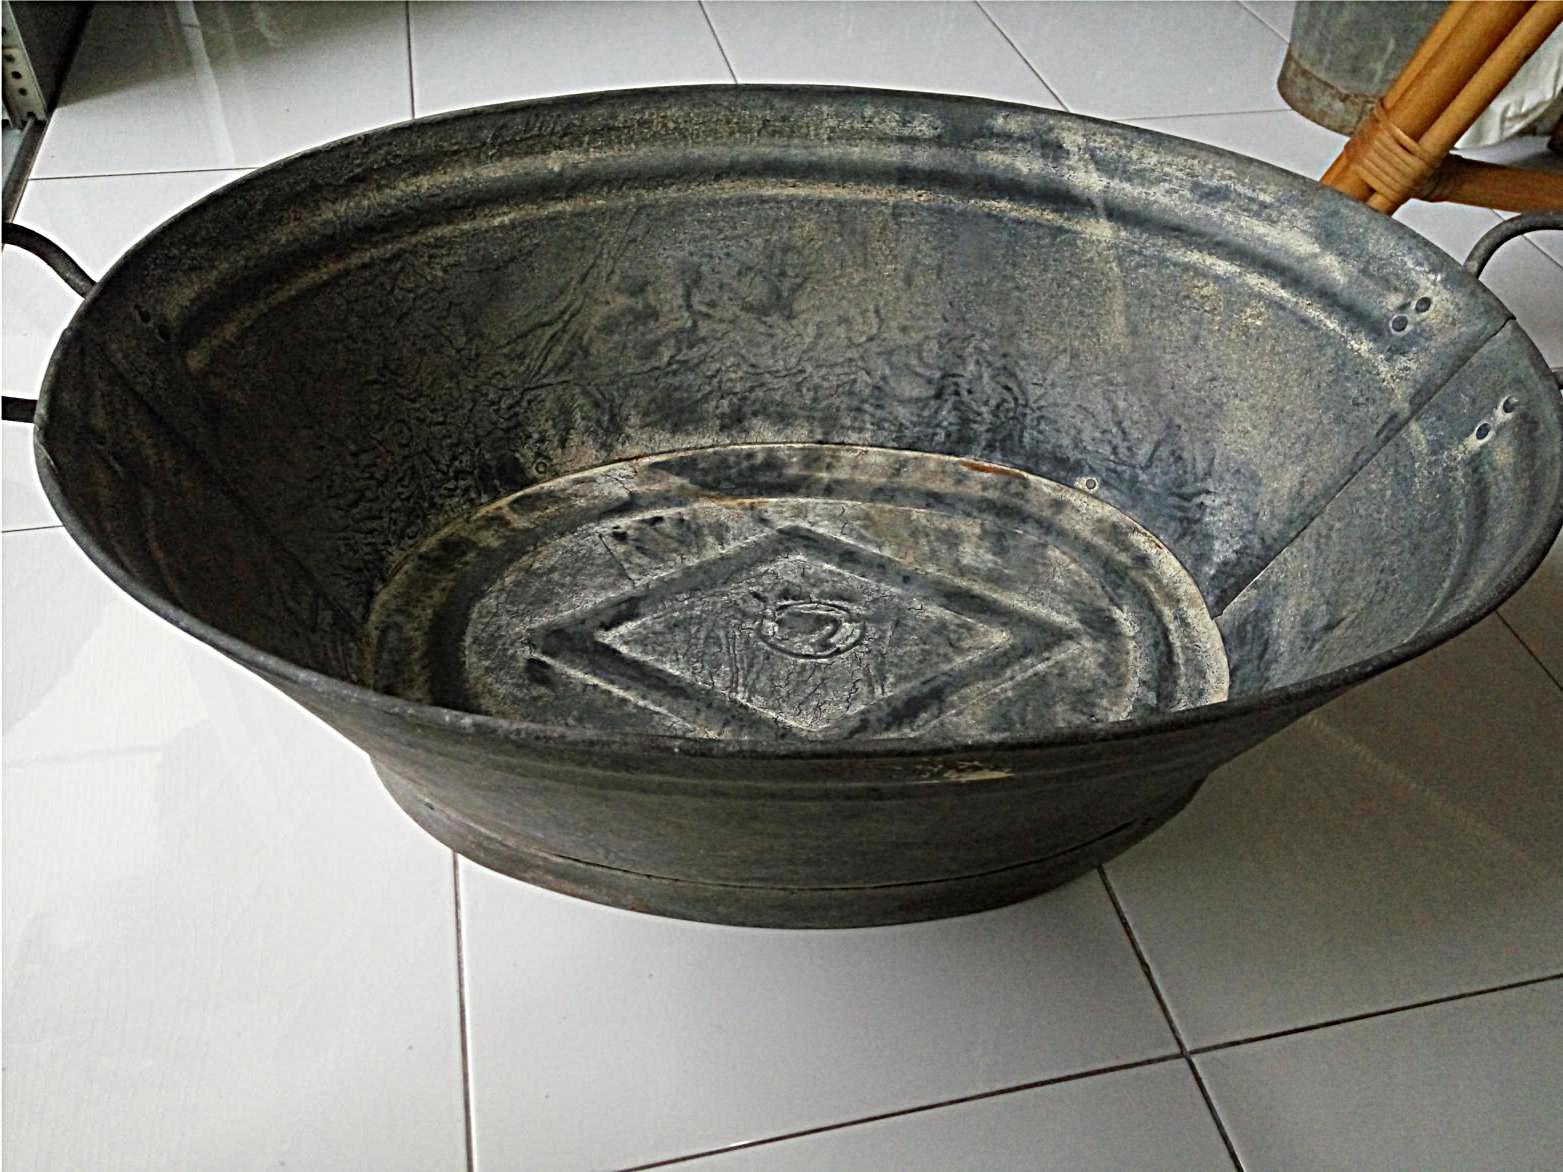 Home Clearance Sale Vintage Galvanized Wash Tub 1950s